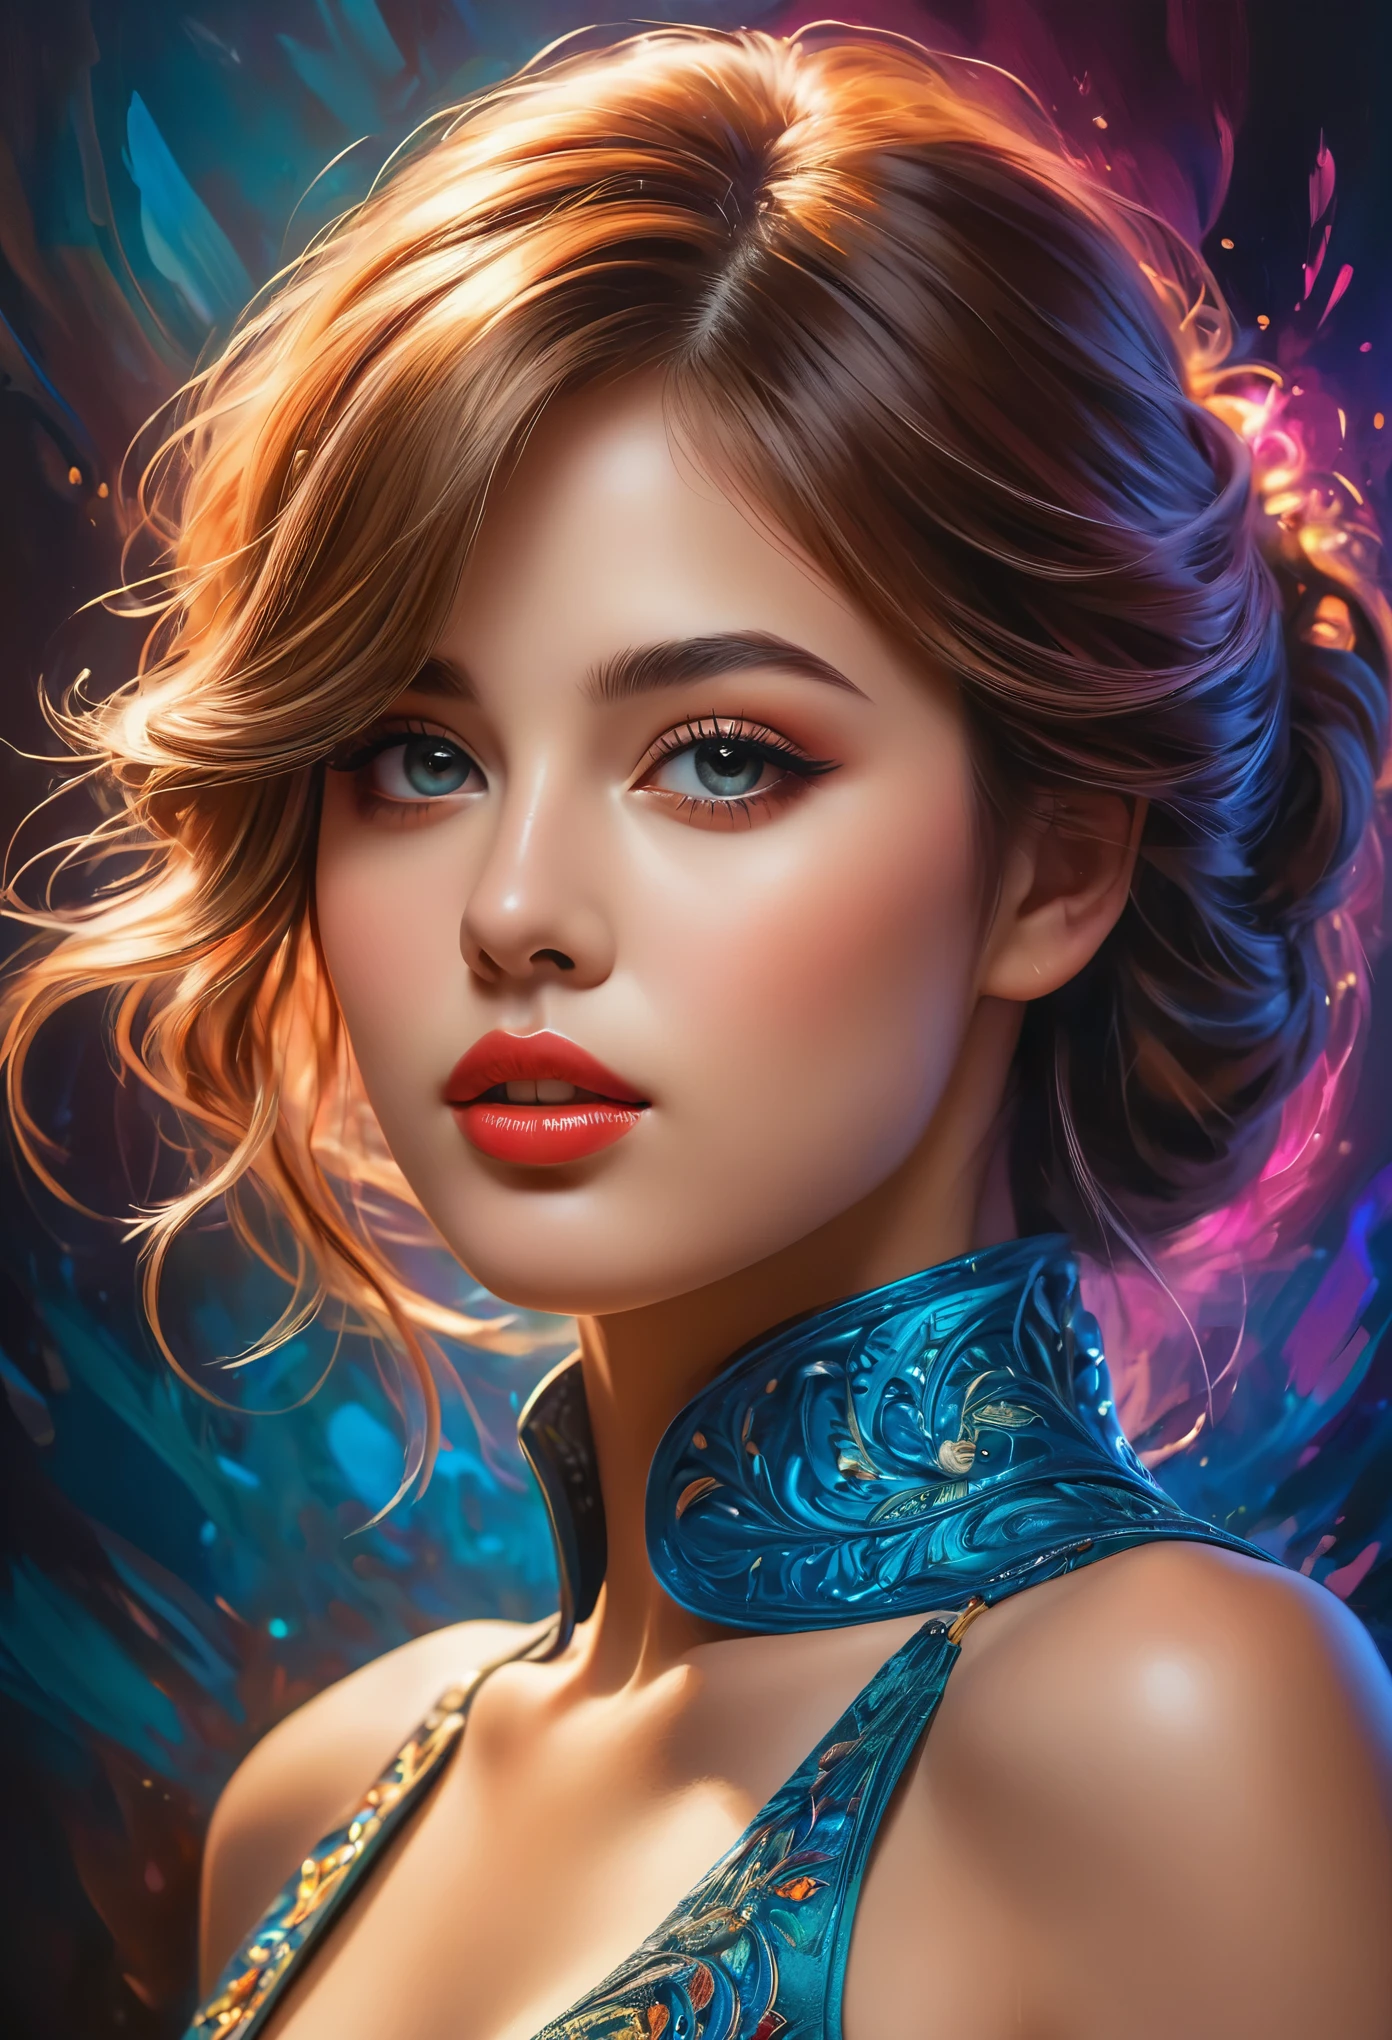 (highest quality,4K,8k,High resolution,masterpiece:1.2),Very detailed,(Realistic,photoRealistic,photo-Realistic:1.37),detailed figure, vibrant colors, intense lighting effects. Here is the prompt for the given theme:

"A beautiful girl with detailed facial features, including beautiful eyes, a delicate nose, and alluring lips. She is the centerpiece of the artwork, exuding an erotic vibe. The artwork showcases a high level of detail, providing an ultra-detailed depiction of the girl's figure. The colors used in the artwork are vibrant and lively, creating a visually captivating effect. The lighting effects in the artwork are intense and dramatic, adding depth and dimension to the overall composition. The medium used to create the artwork is a combination of digital illustration and sensual fine art painting. The overall image quality is of the highest caliber, with a resolution of 4k or 8k, and it possesses a realistic and photorealistic aesthetic, capturing every intricate detail of the girl's form and creating a masterpiece that is visually stunning. The color palette used in the artwork is rich and diverse, incorporating a wide range of seductive hues. The lighting in the artwork is carefully designed to accentuate the girl's features and create a mesmerizing atmosphere. The artwork portrays an erotic scene that can be both sensual and captivating, invoking strong emotions in the viewer. The overall composition is balanced and harmonious, with a focus on the girl's allure and captivating presence. This artwork showcases the beauty and allure of the female form in a distinctive and eye-catching manner." 